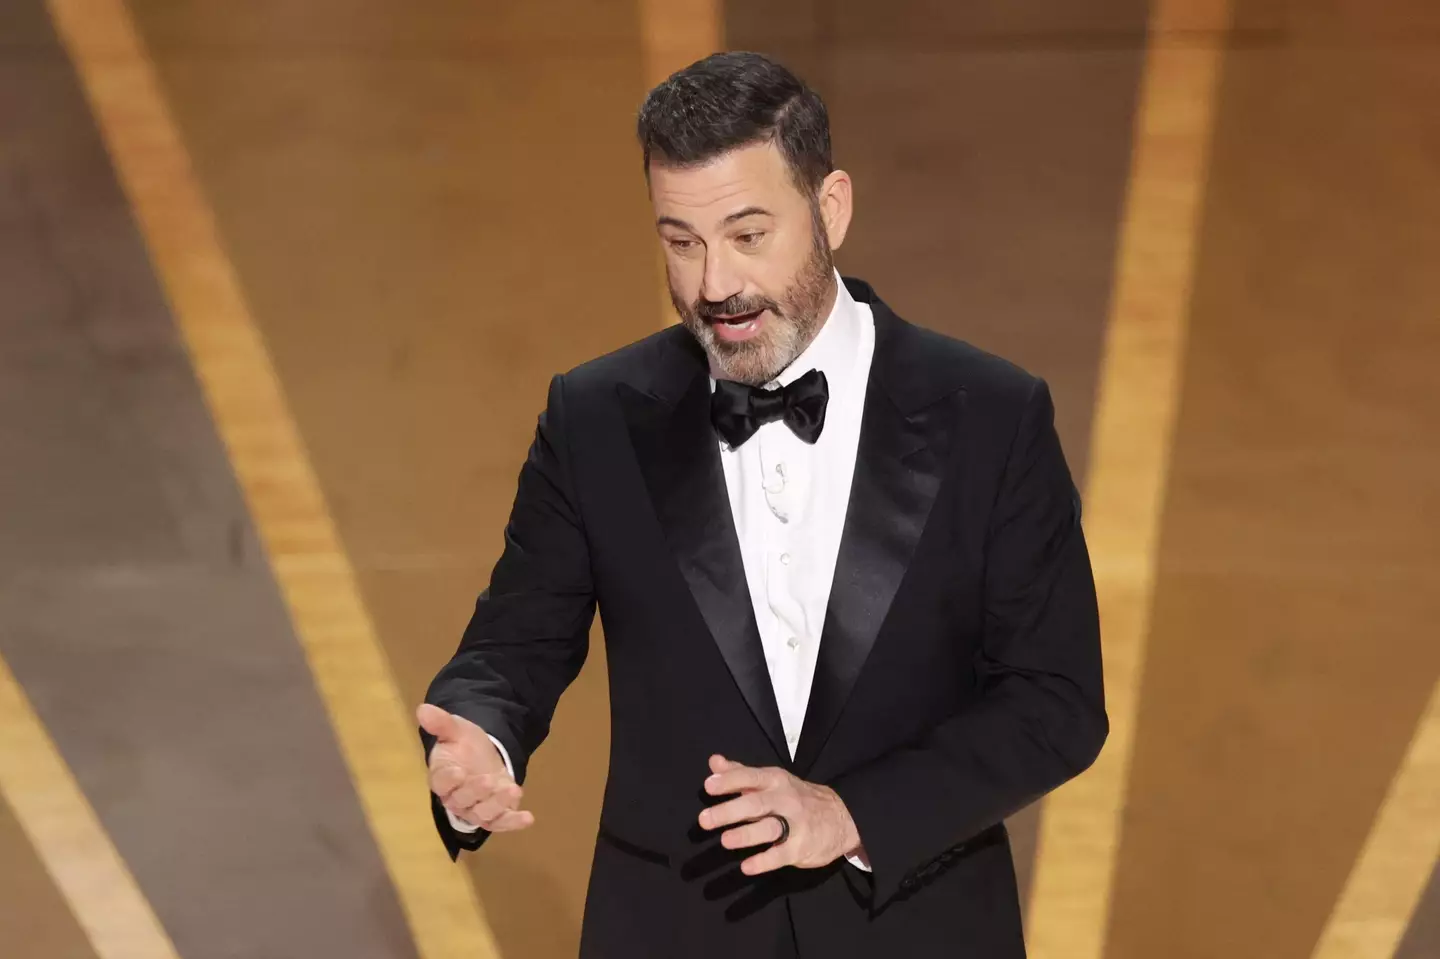 Jimmy Kimmel during his opening monologue at this year's Oscars.